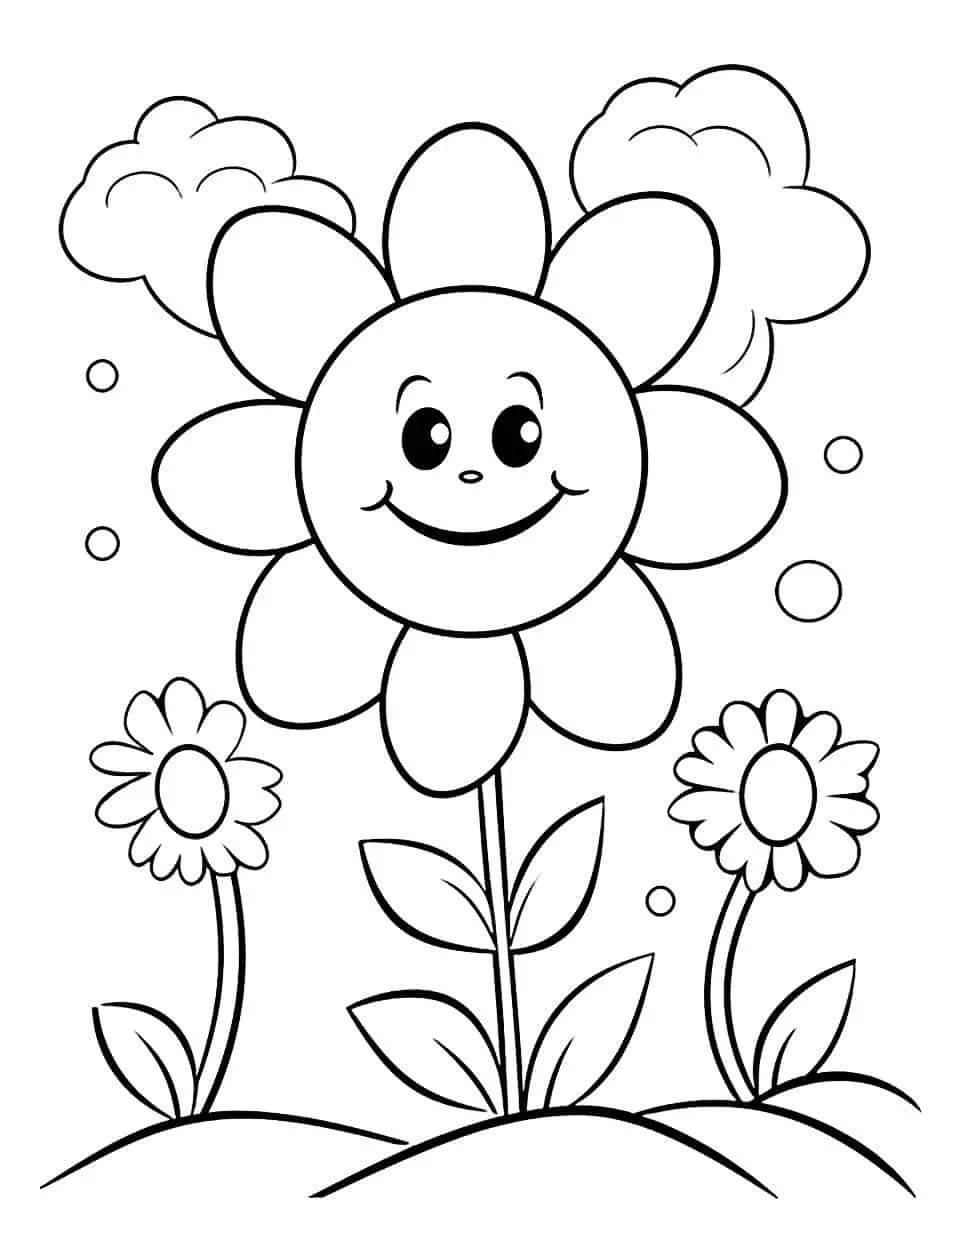 Pre K Spring Joy Coloring Page - An easy, colorful page featuring spring elements like a rainbow, sun, and flowers for pre-K children.